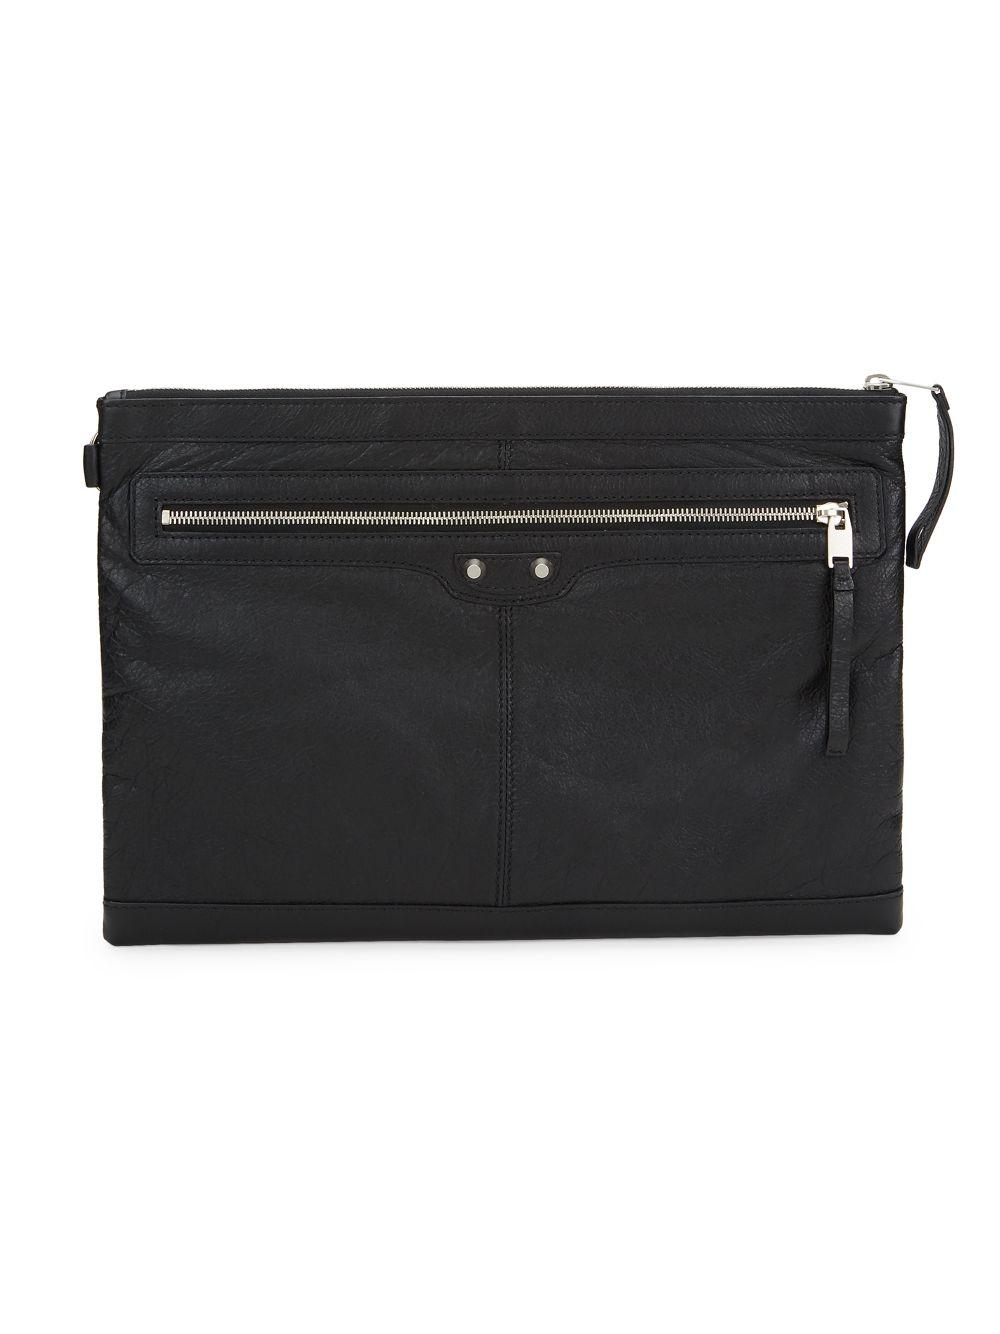 Balenciaga Leather Document Case in Black for Men | Lyst